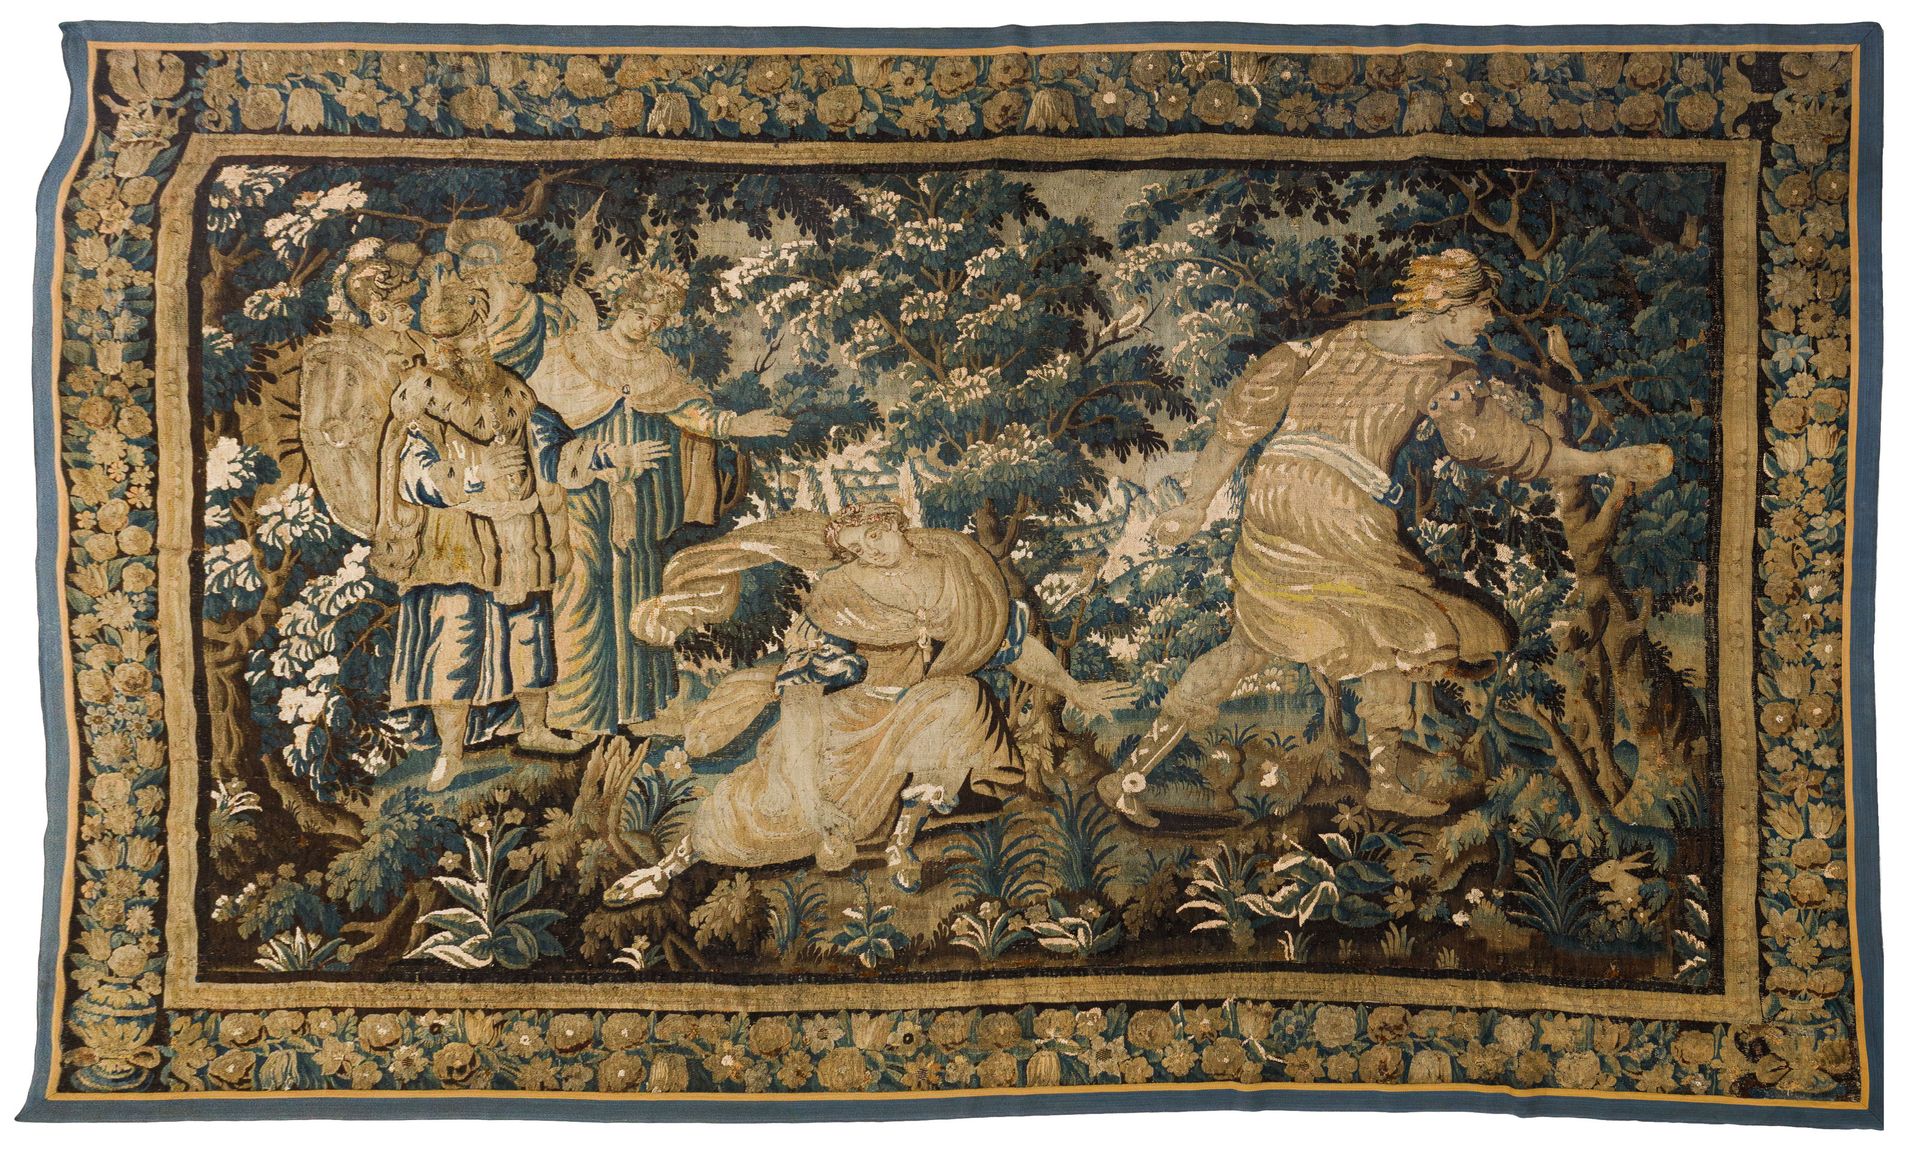 Tapisserie. Bruxelles. Ca. 1700. Brussels tapestry, ca. 1700. 


Wool and linen.&hellip;